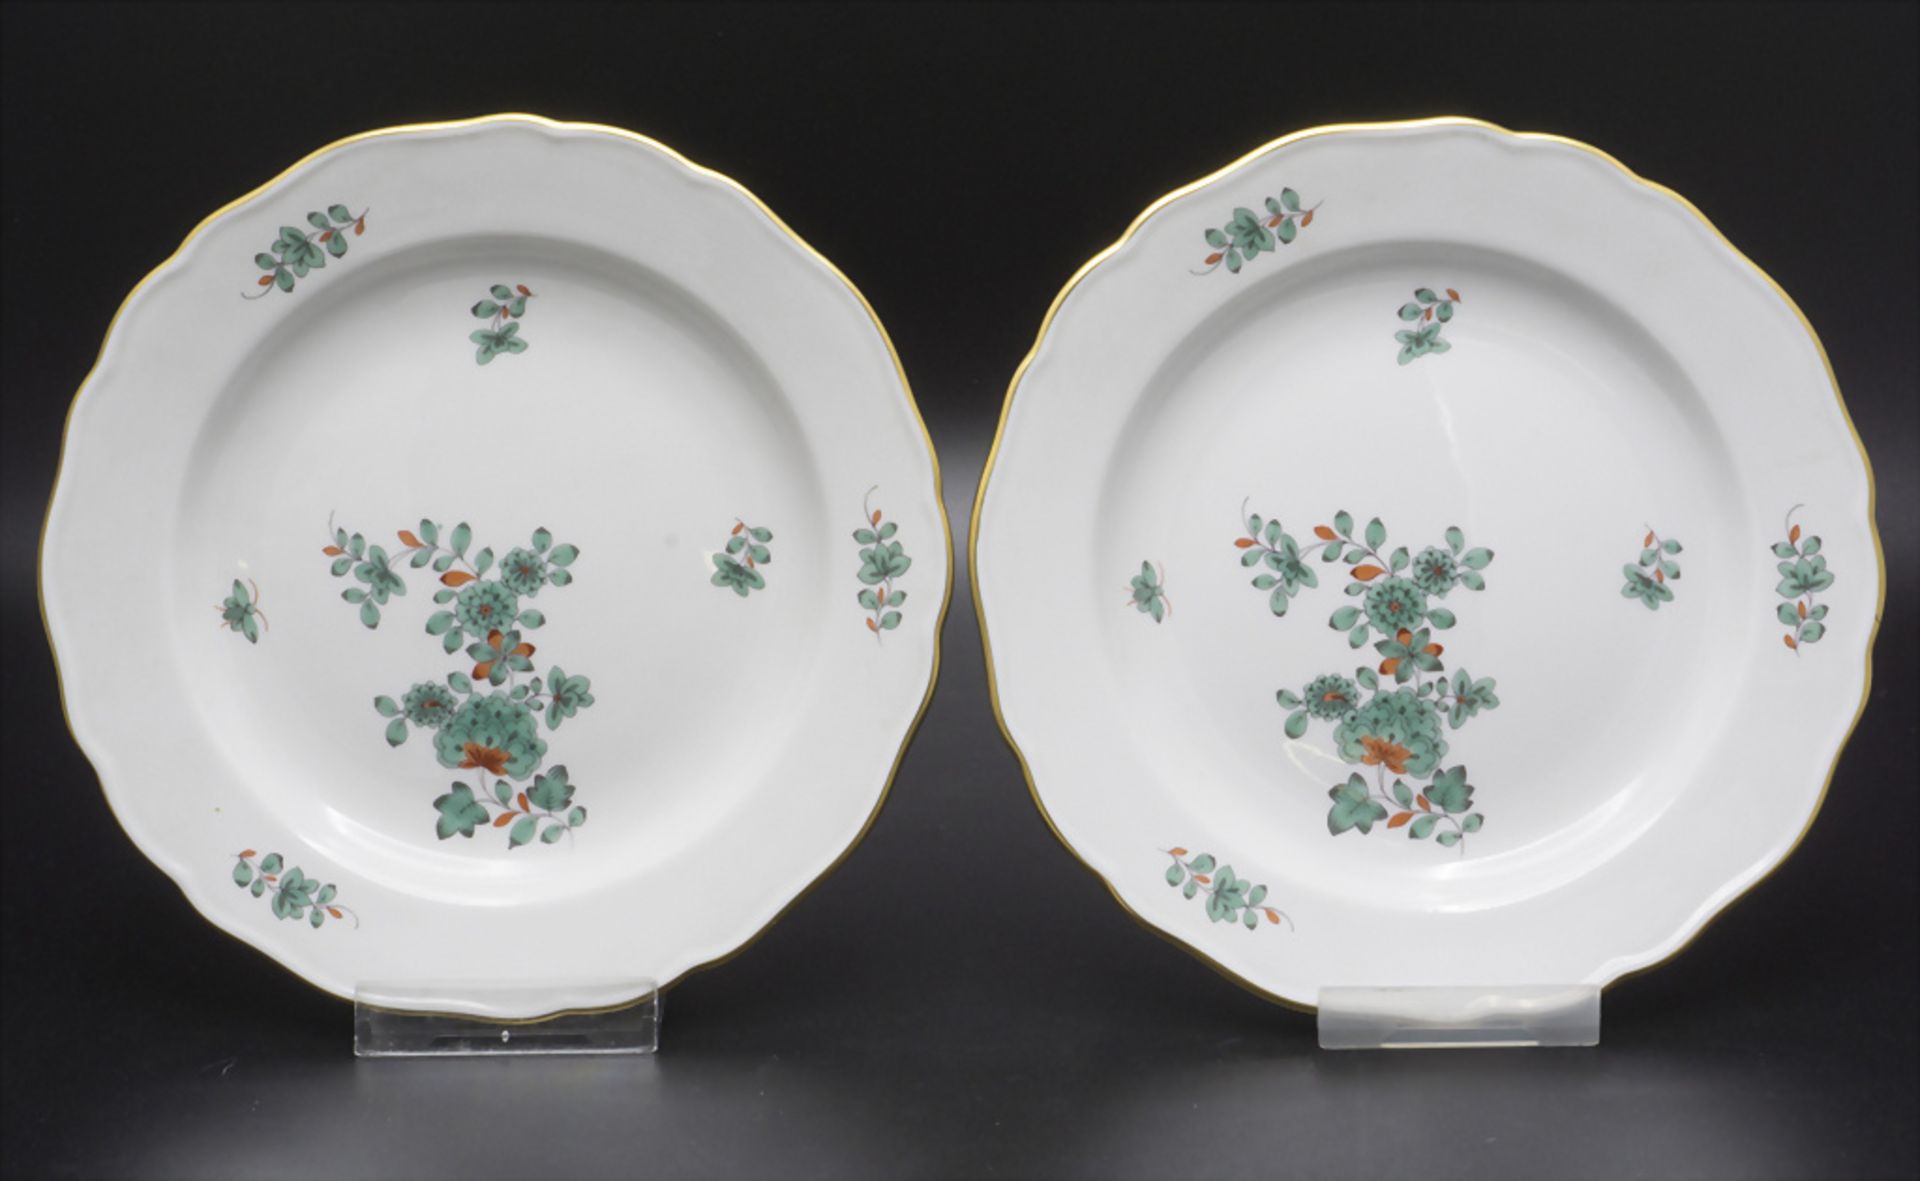 6 Kuchenteller Indianische Blume mit Falter / A set of 6 cake plates with Indian flowers and a ... - Image 4 of 9